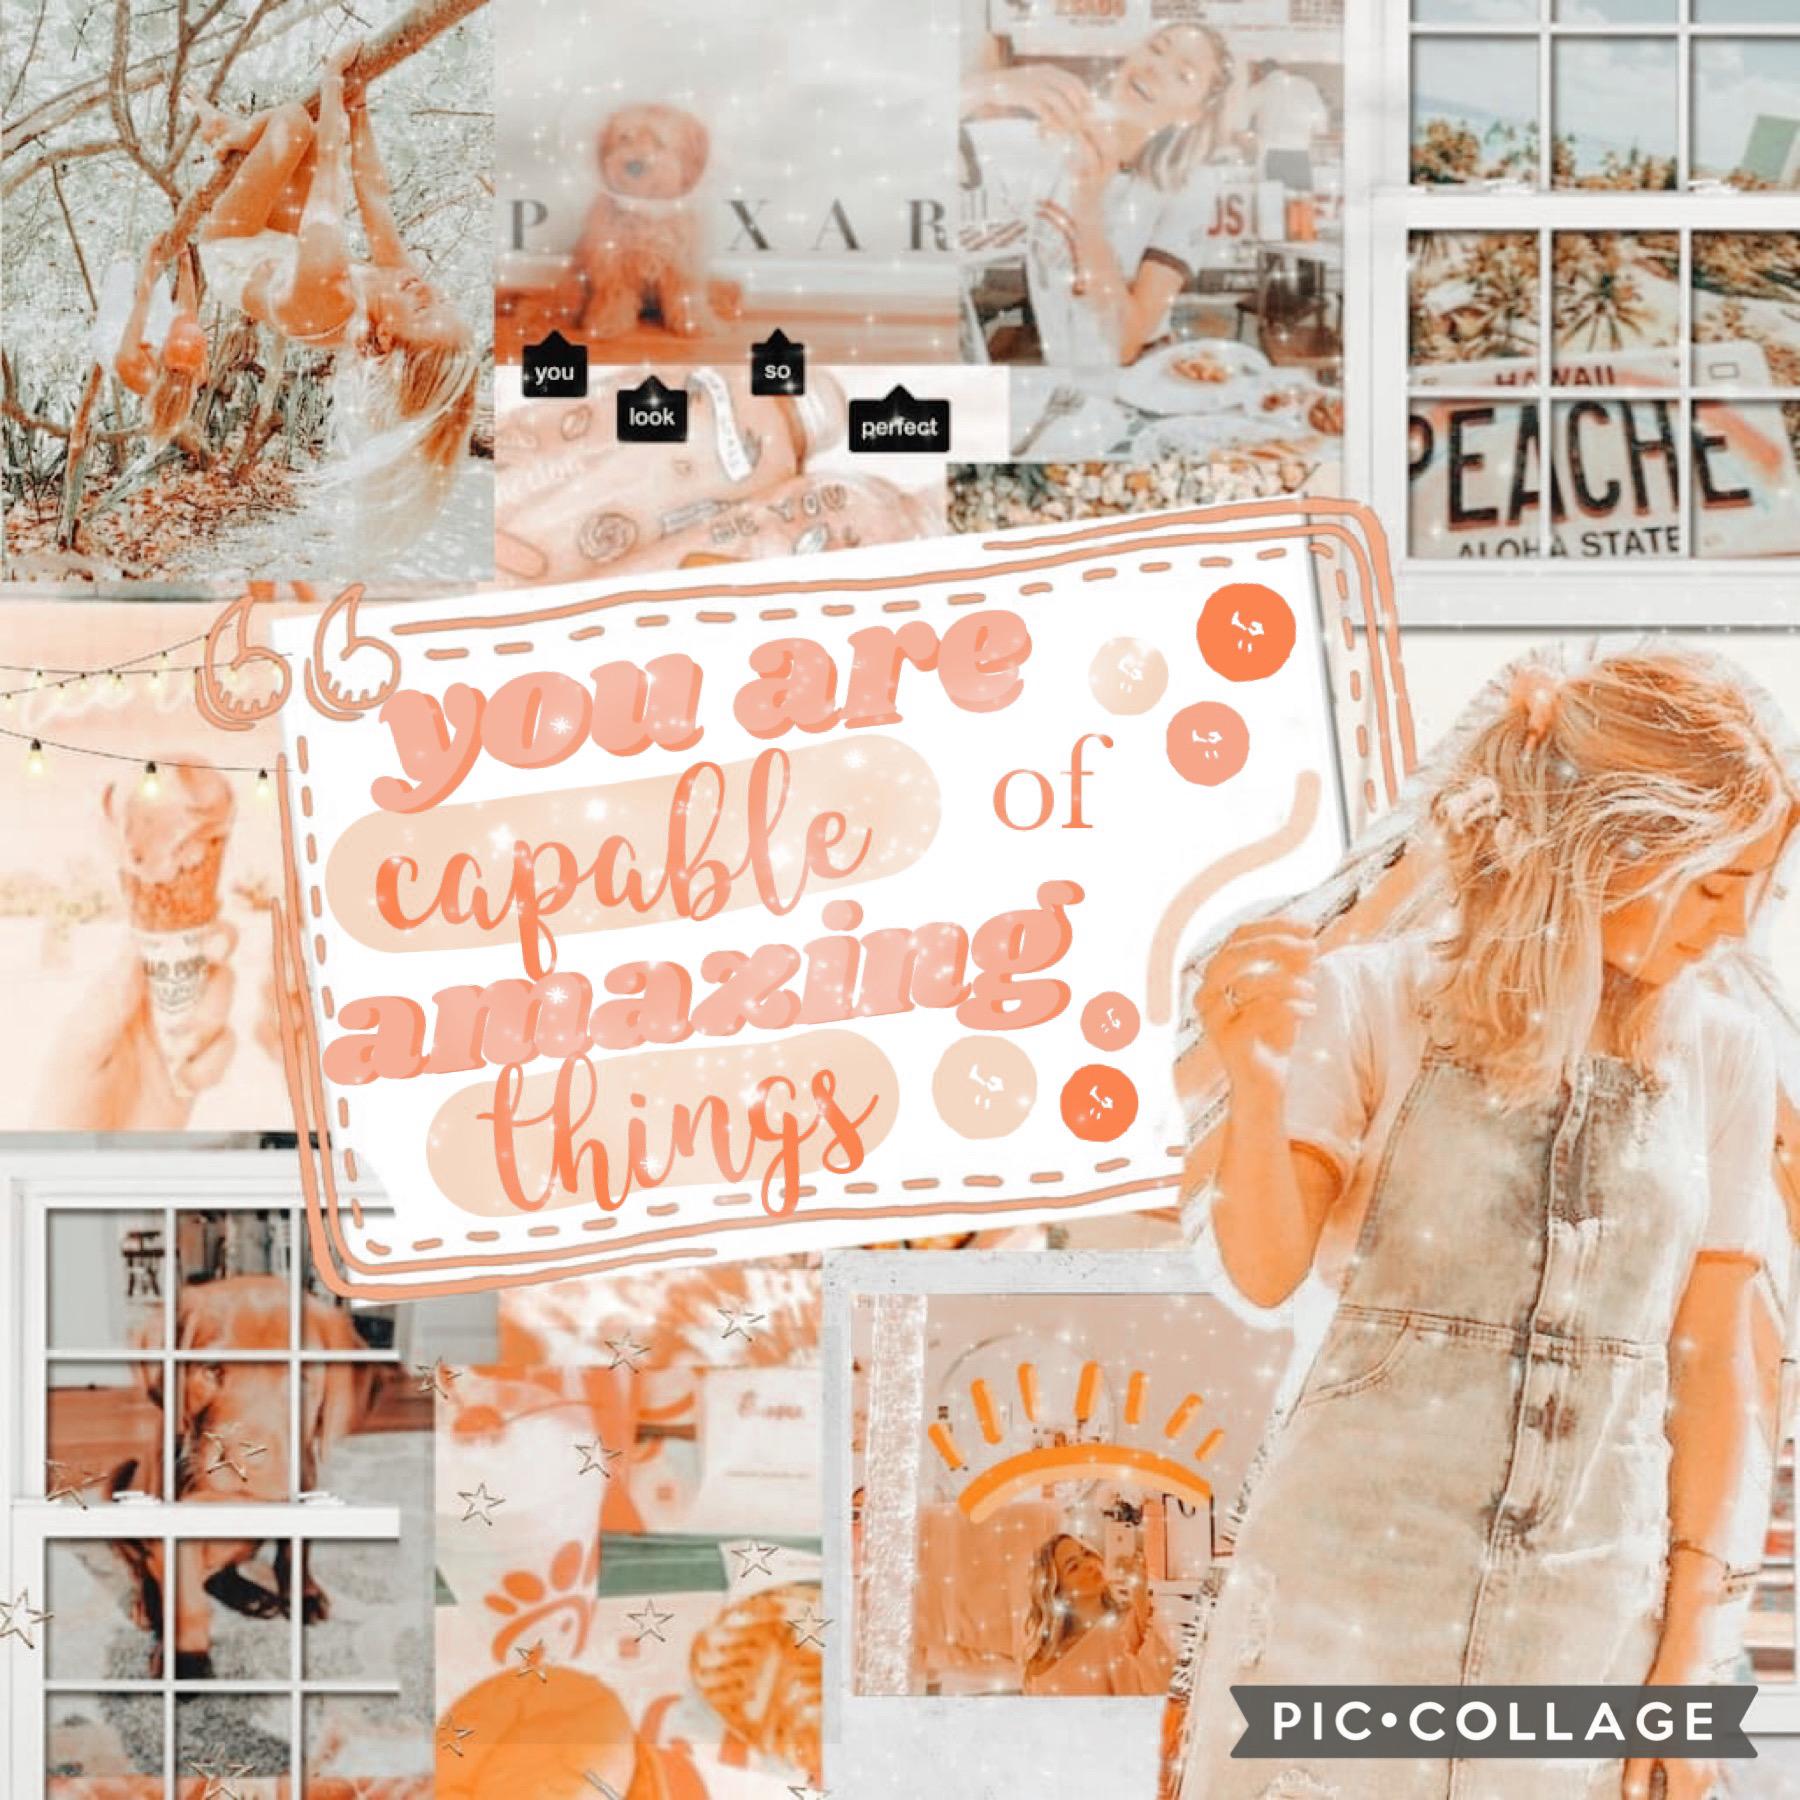 ✨collab✨
w radiatingfaith🤩she did the GORGEOUS bg and i did the text!i rlly hope you like it!plz go follow her she has a STUNNING account.also plz pray for my best friend who’s in the hospital! if i’m not very active that’s why